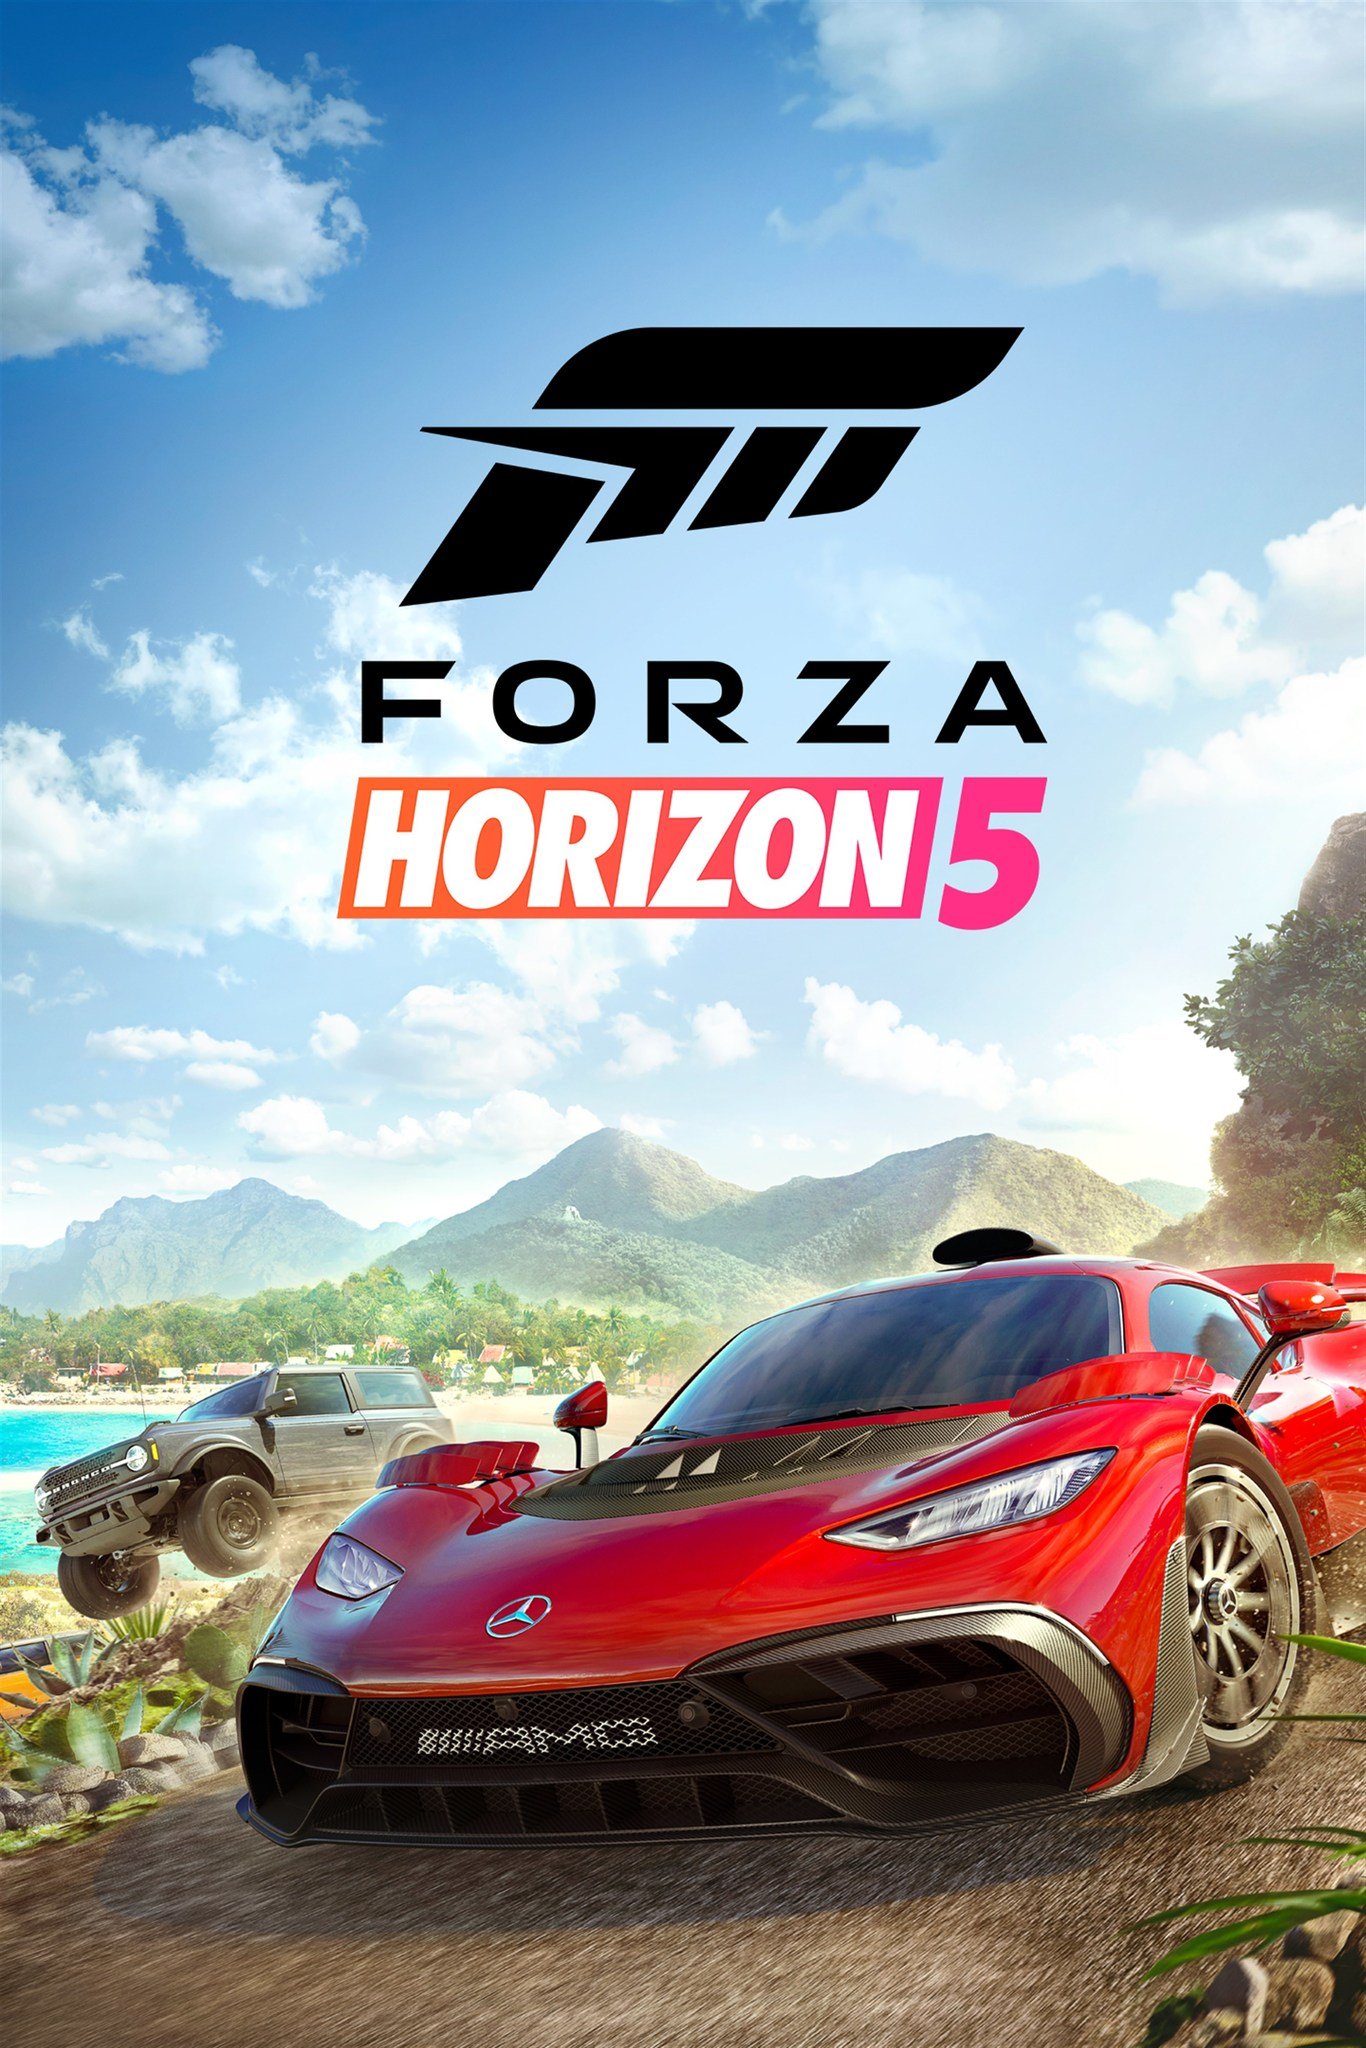 Forza Horizon 5 wants multiplayer to be simple to access and fun to play